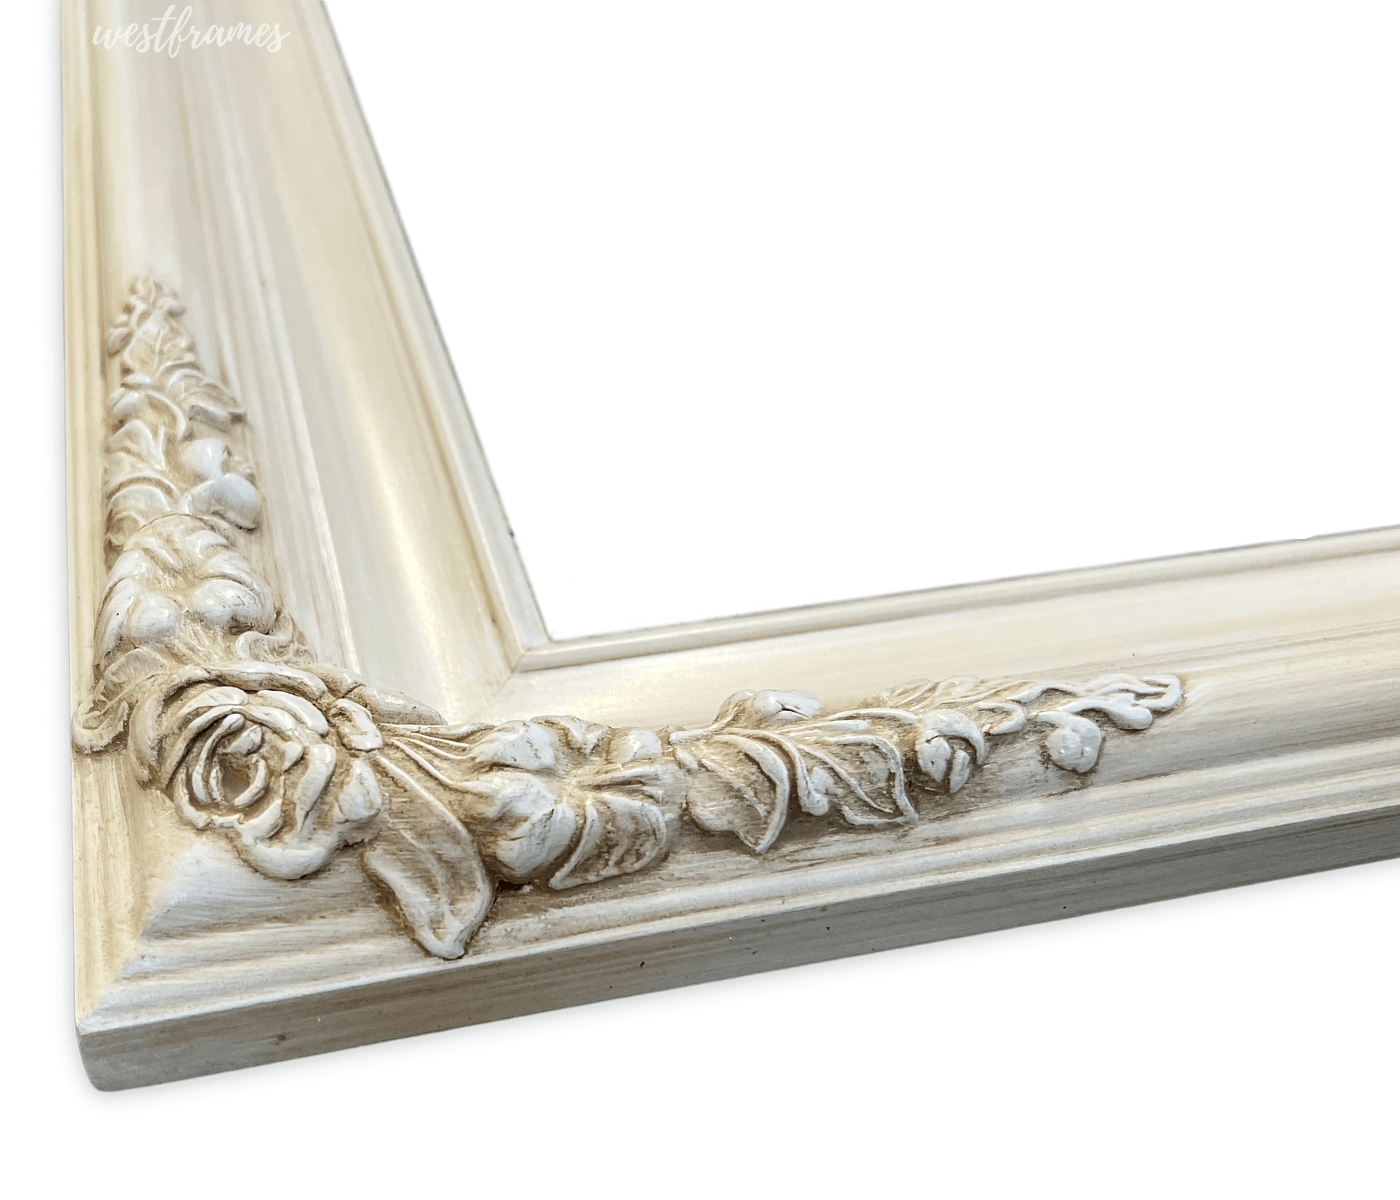 Duchess French Baroque Ornate Wood Picture Frame 3.25" Antique Off-White Finish - West Frames